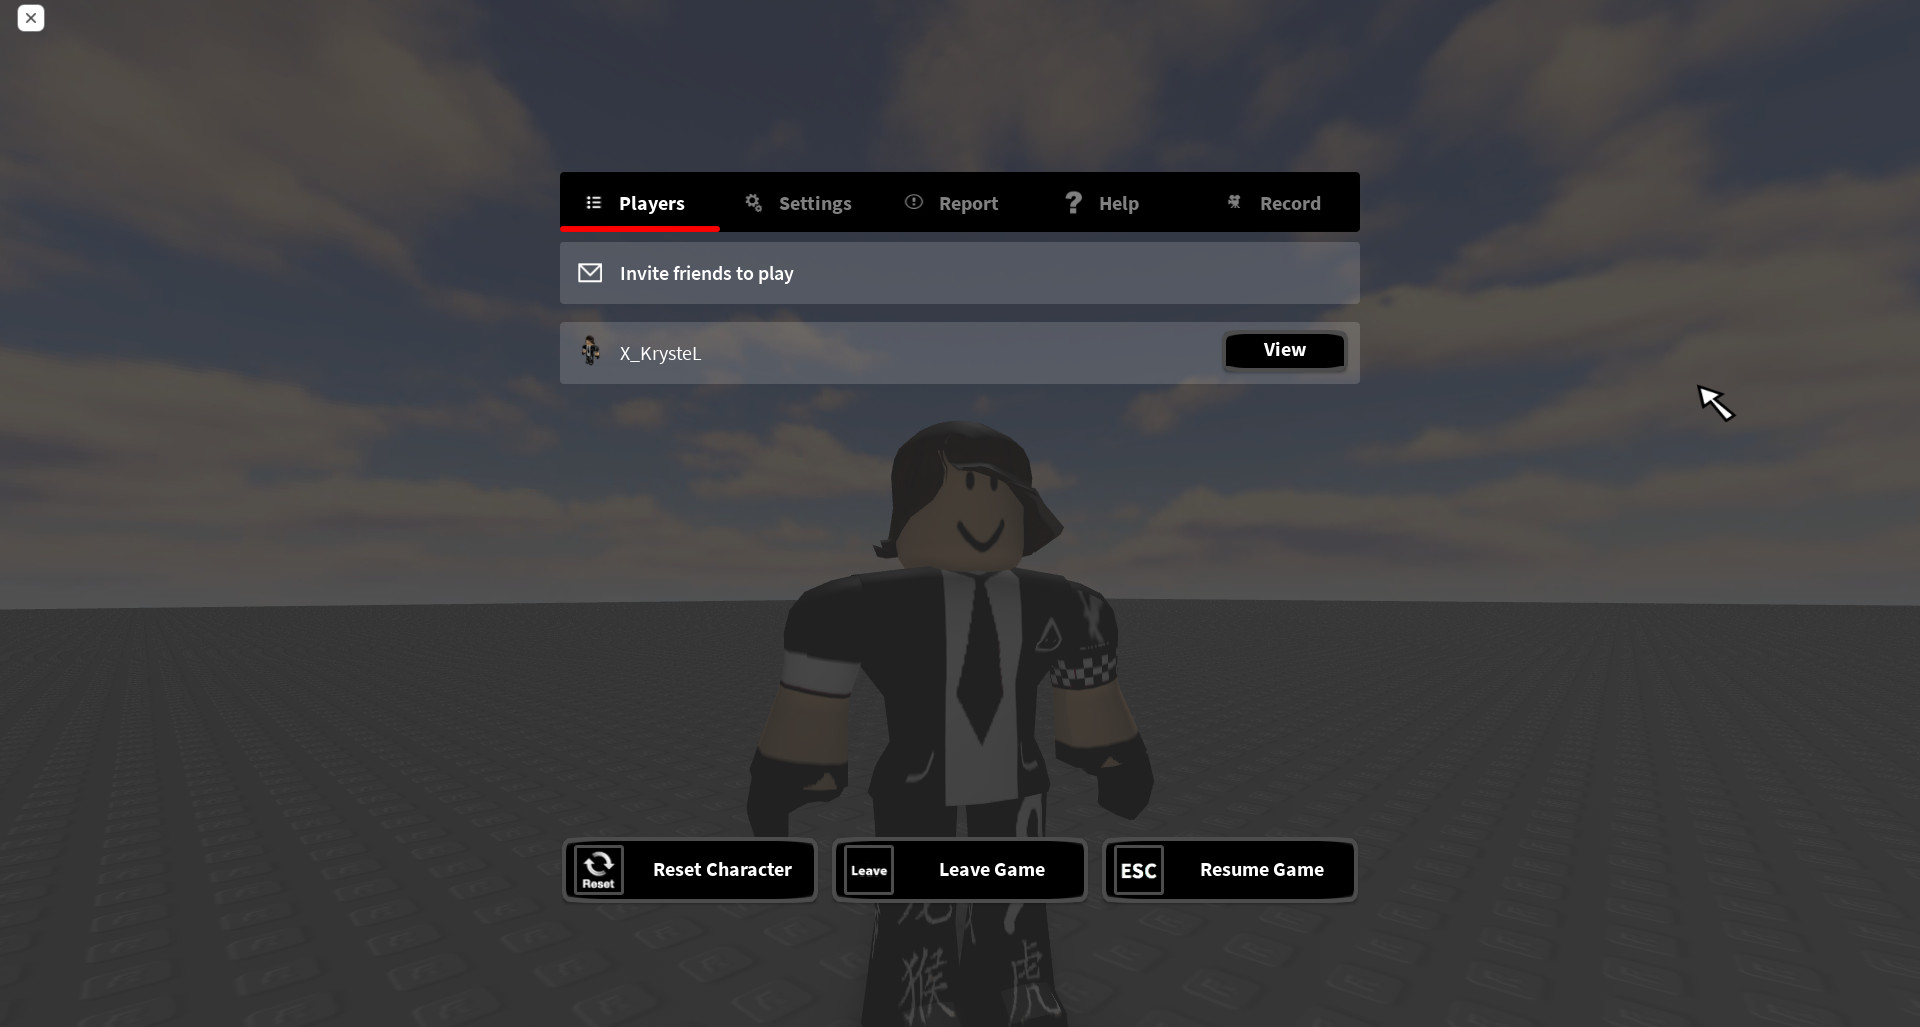 Roblox 2012 Textures For 2021 Update 07 04 2021 Roblox Mods - roblox homepage 2012